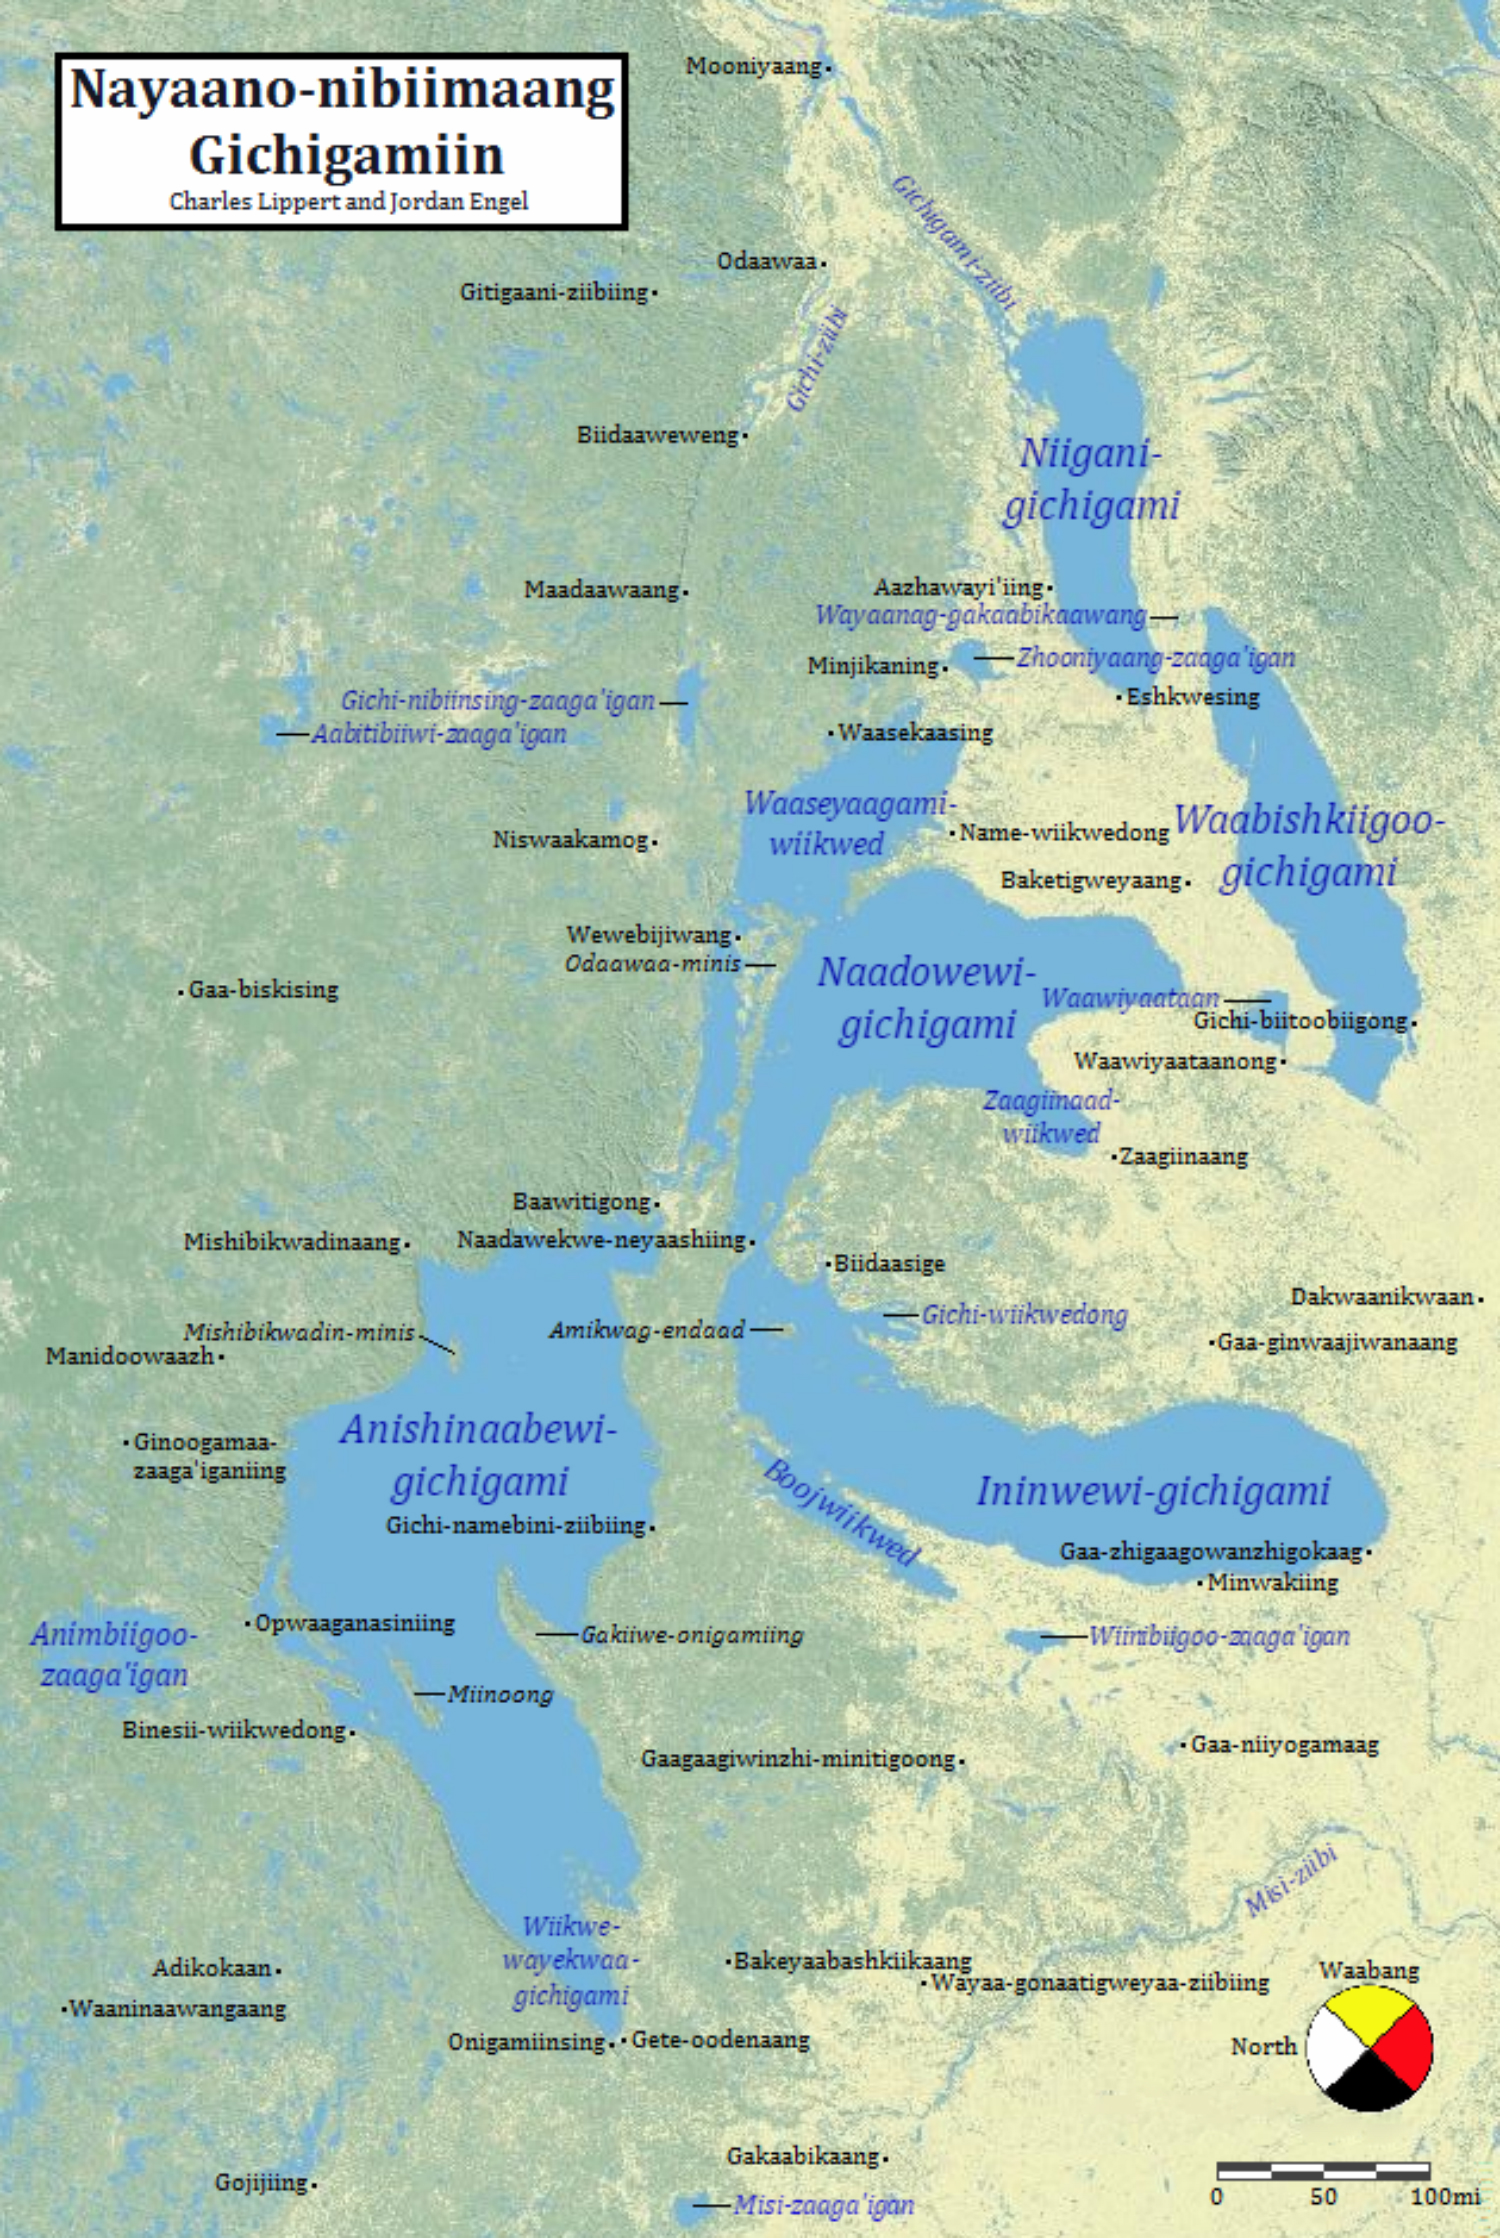 An Ojibwe map of the Great Lakes